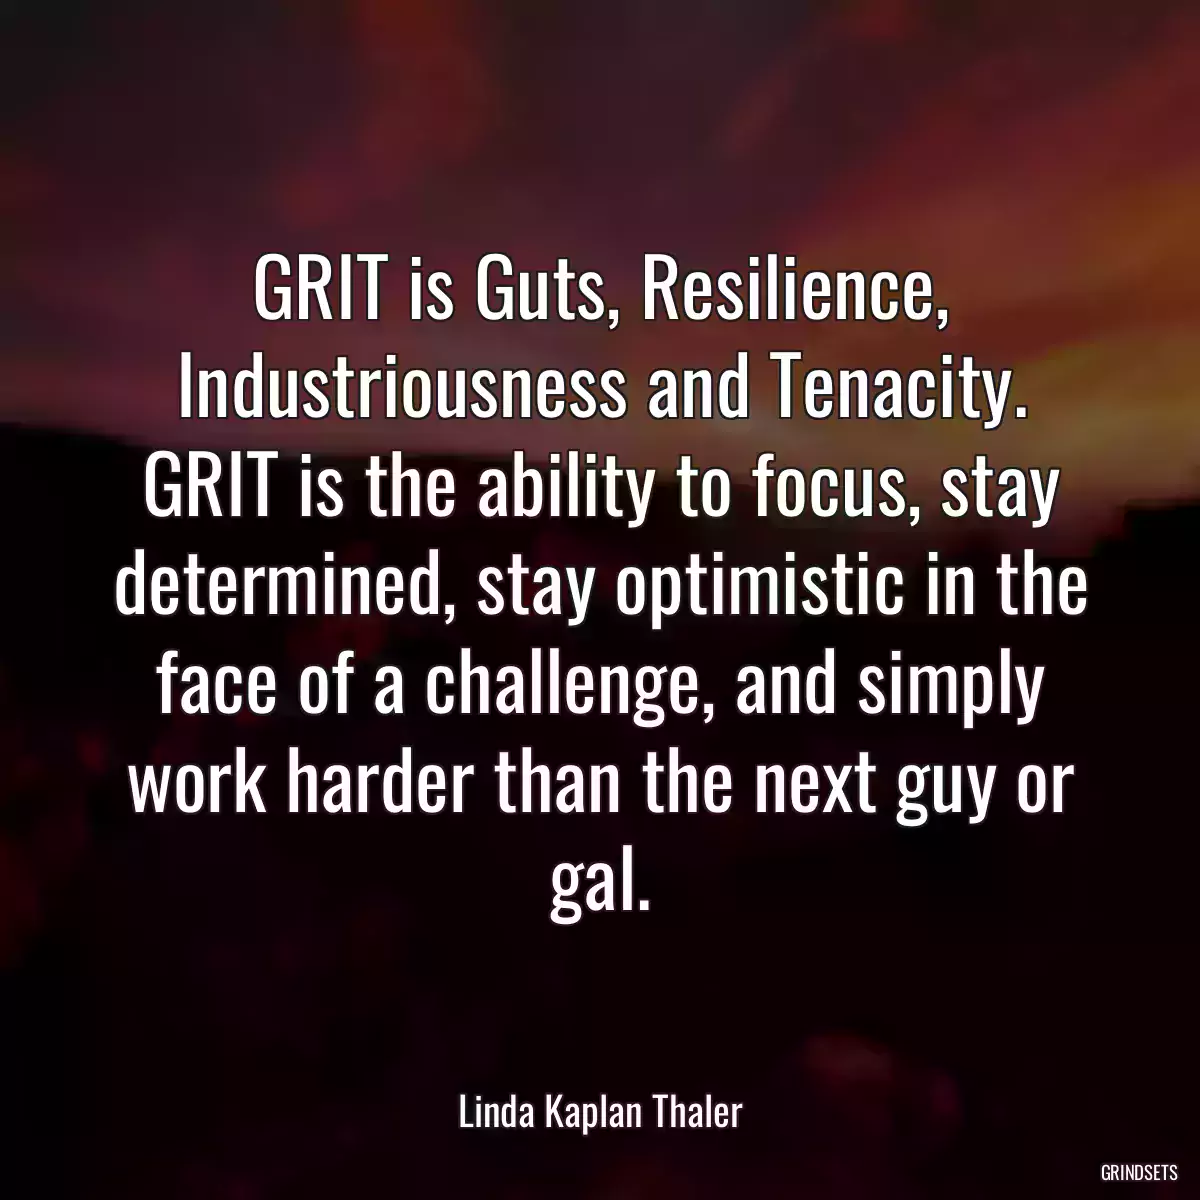 GRIT is Guts, Resilience, Industriousness and Tenacity. GRIT is the ability to focus, stay determined, stay optimistic in the face of a challenge, and simply work harder than the next guy or gal.